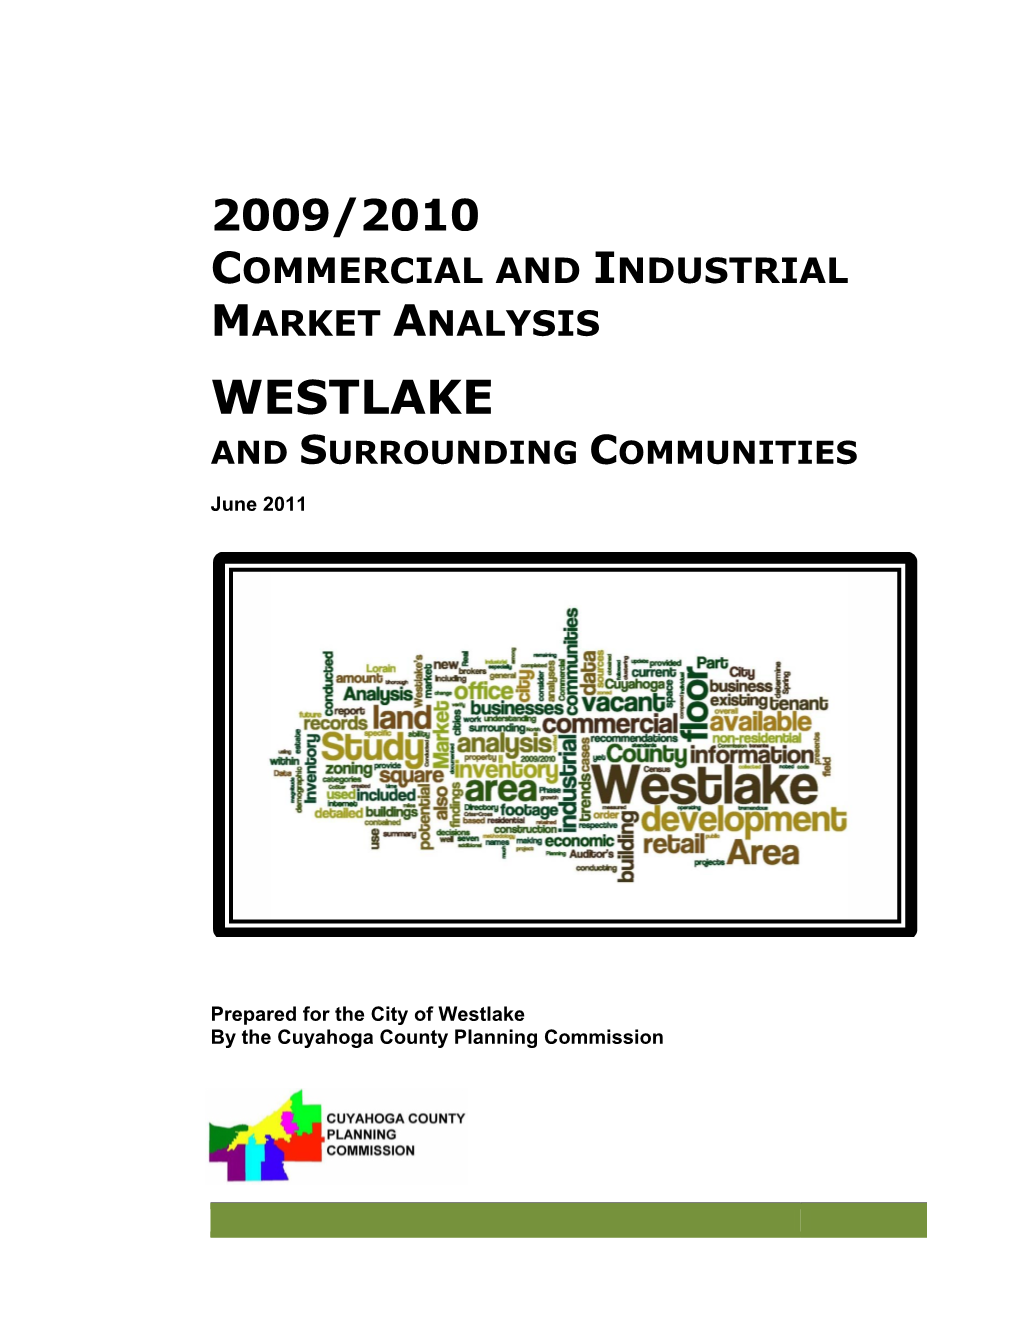 2009/2010 Commercial and Industrial Market Analysis